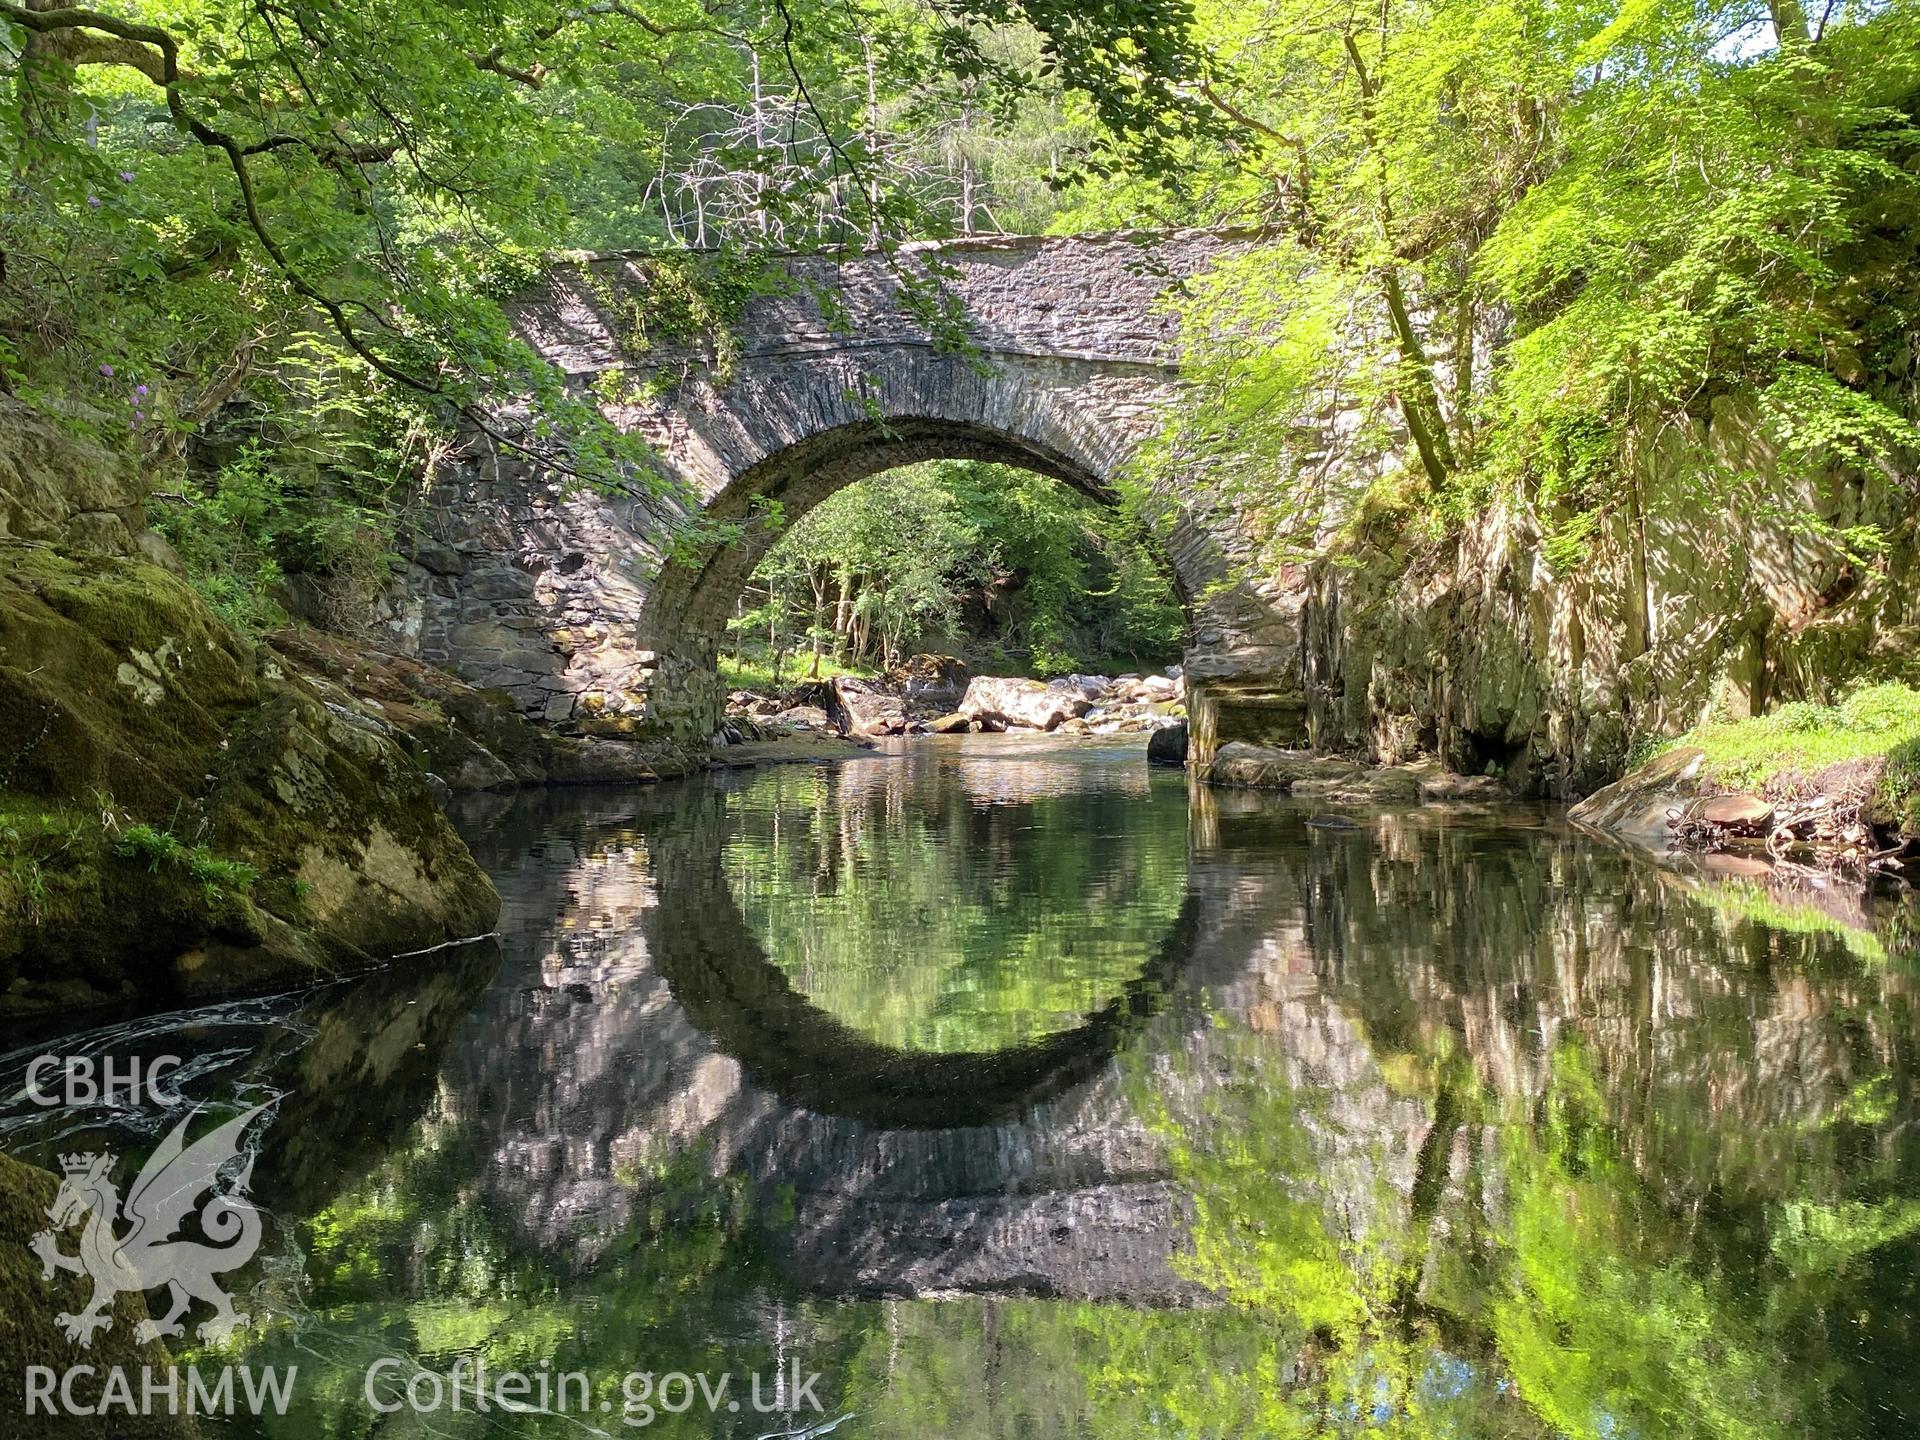 Digital colour photograph showing Pont Aberglaslyn, produced by Paul R Davis in 2021.